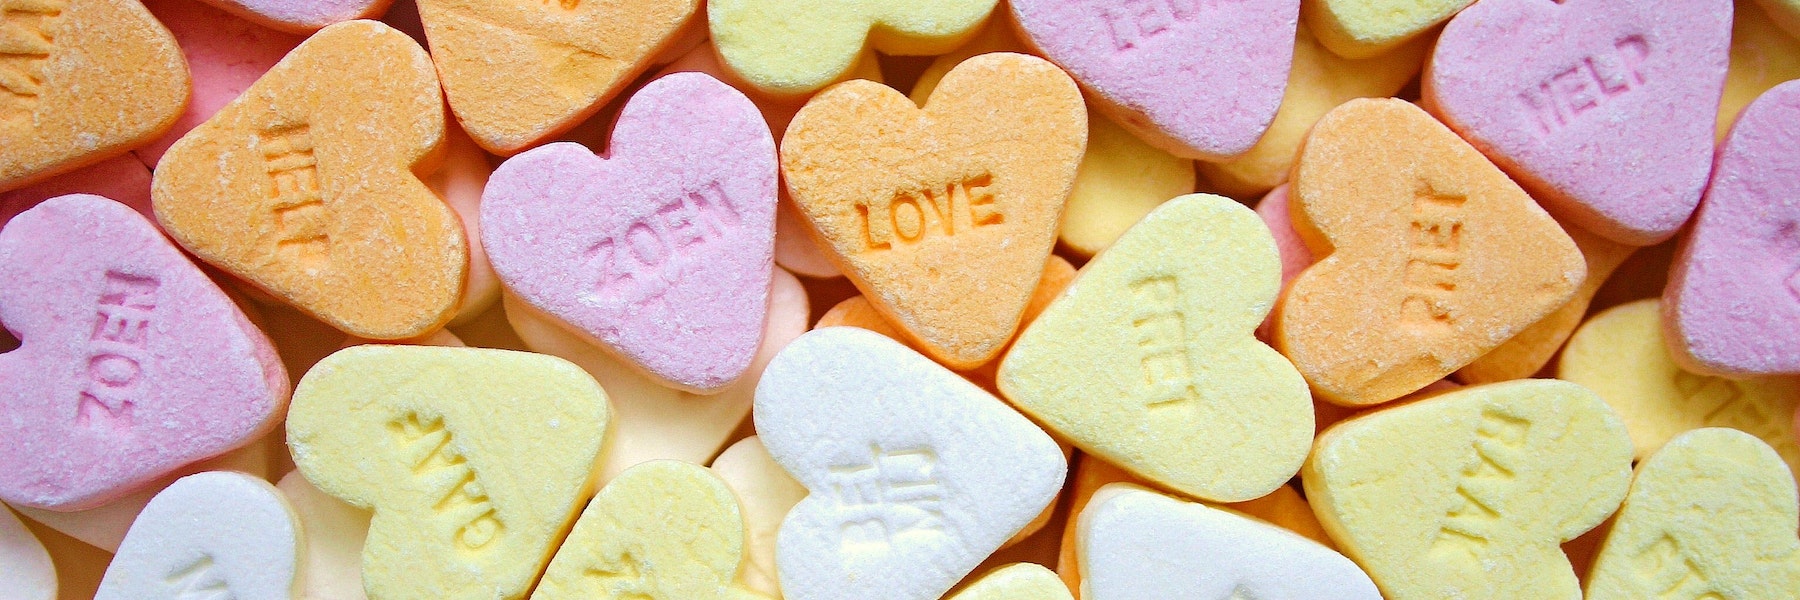 Giant pile of candy hearts